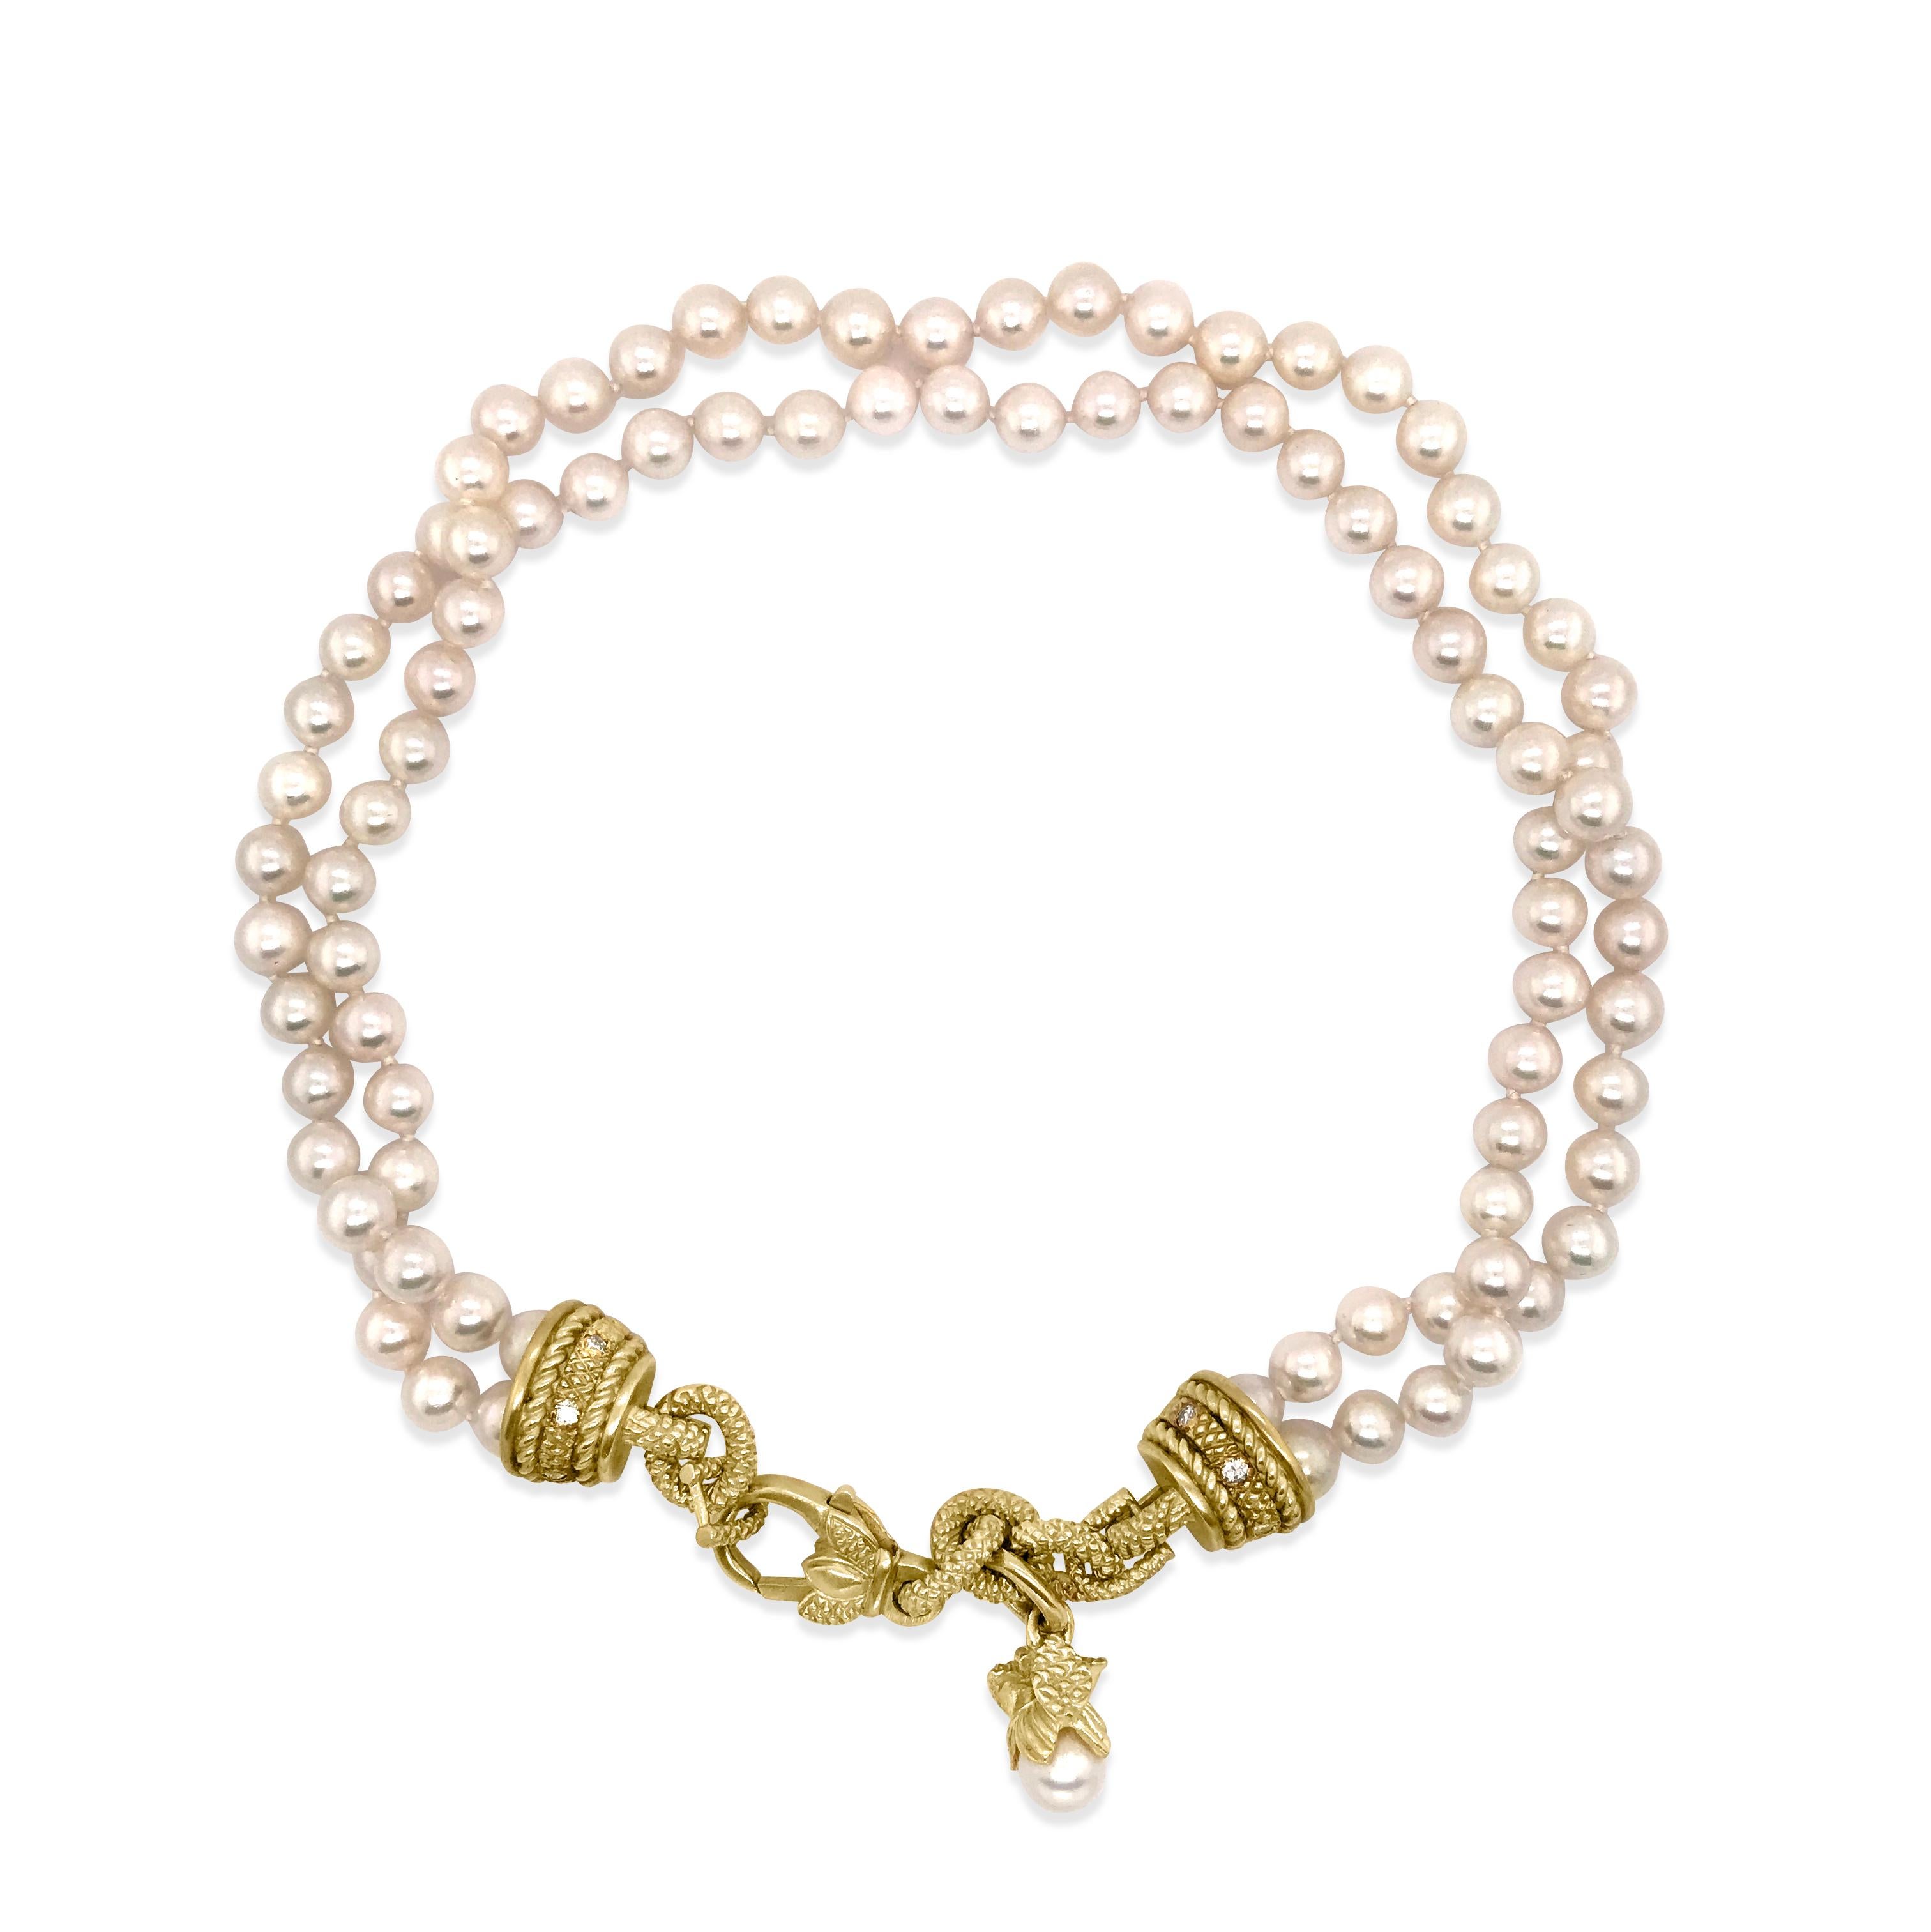 This collectible Judith Ripka pearl and gold necklace is crafted in 18K and 14K yellow gold. It comprises 4 strands of lustrous silk-strung cultured pearls of an enchanting 'pinkish-white' color, approx. 7.5 mm in diameter. The necklace composed of